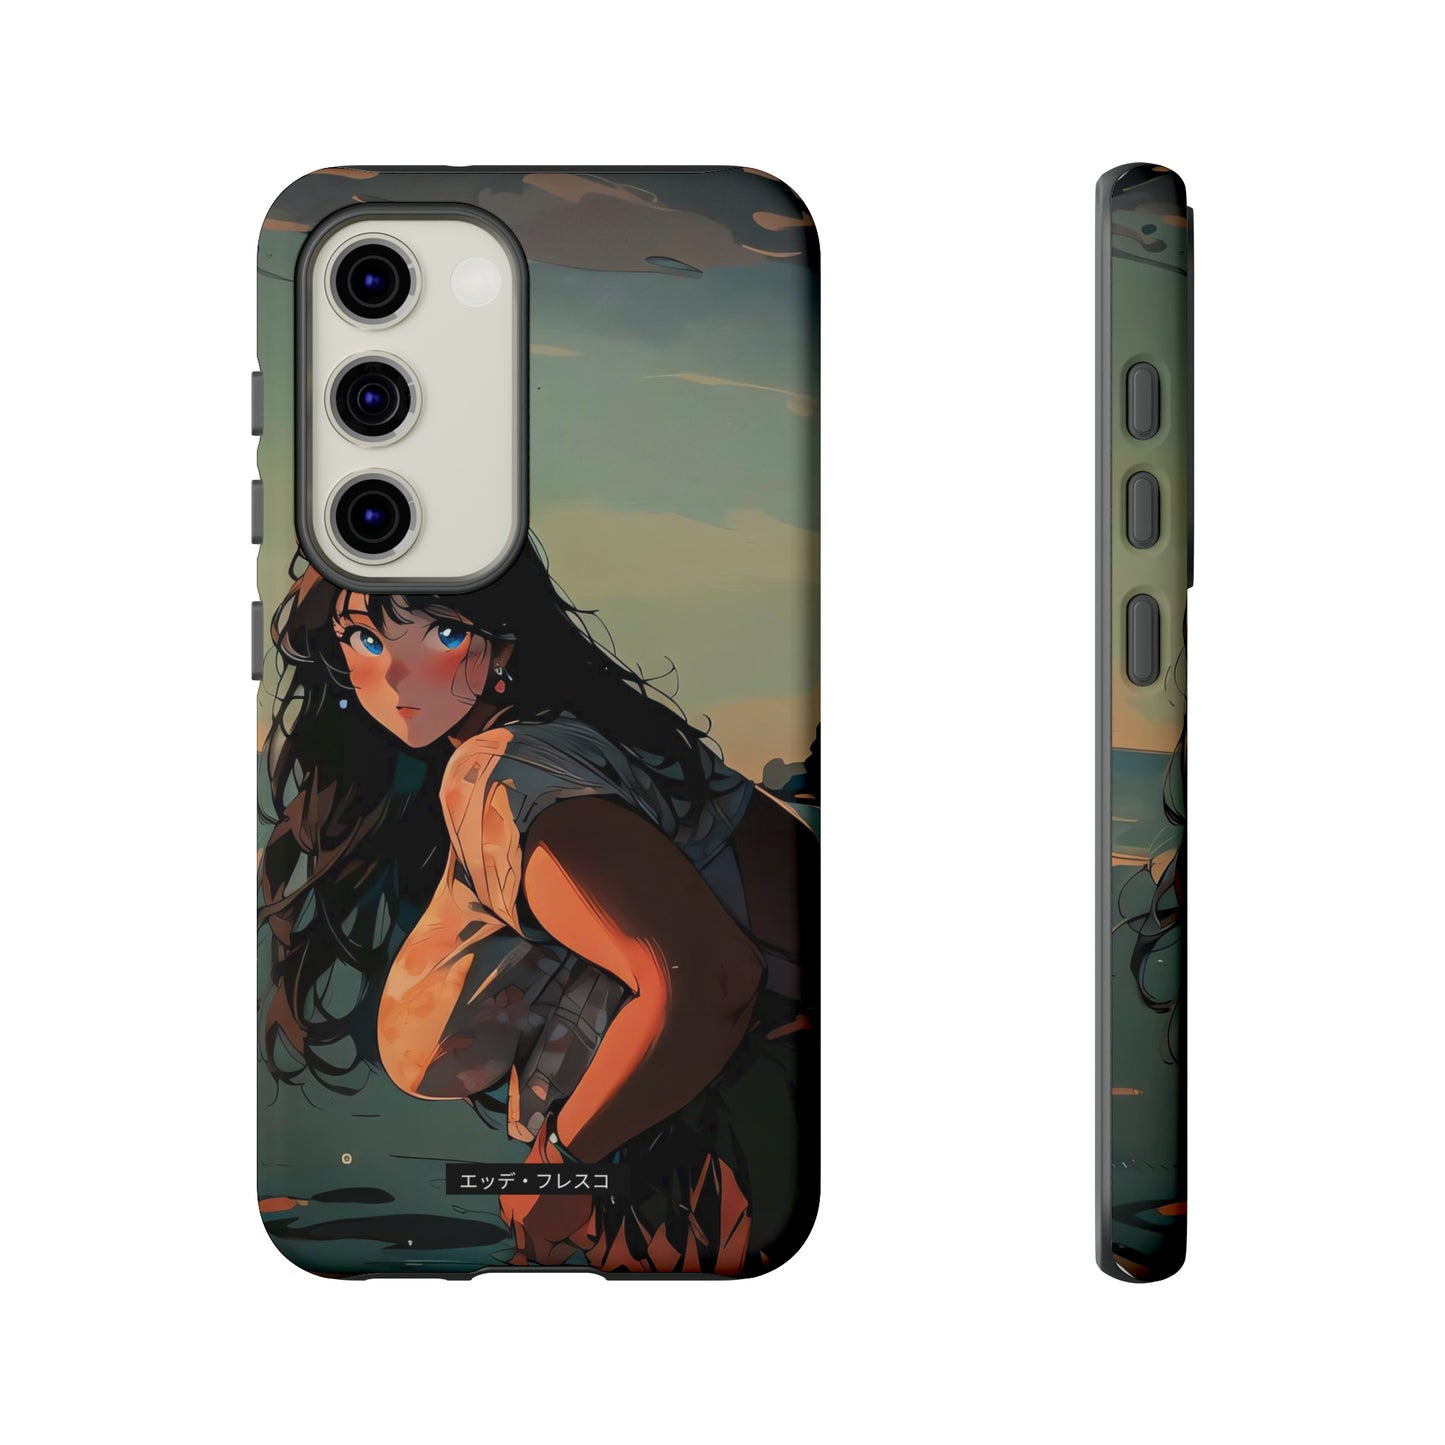 Anime Style Art Tough Cases- "Thick Overload"